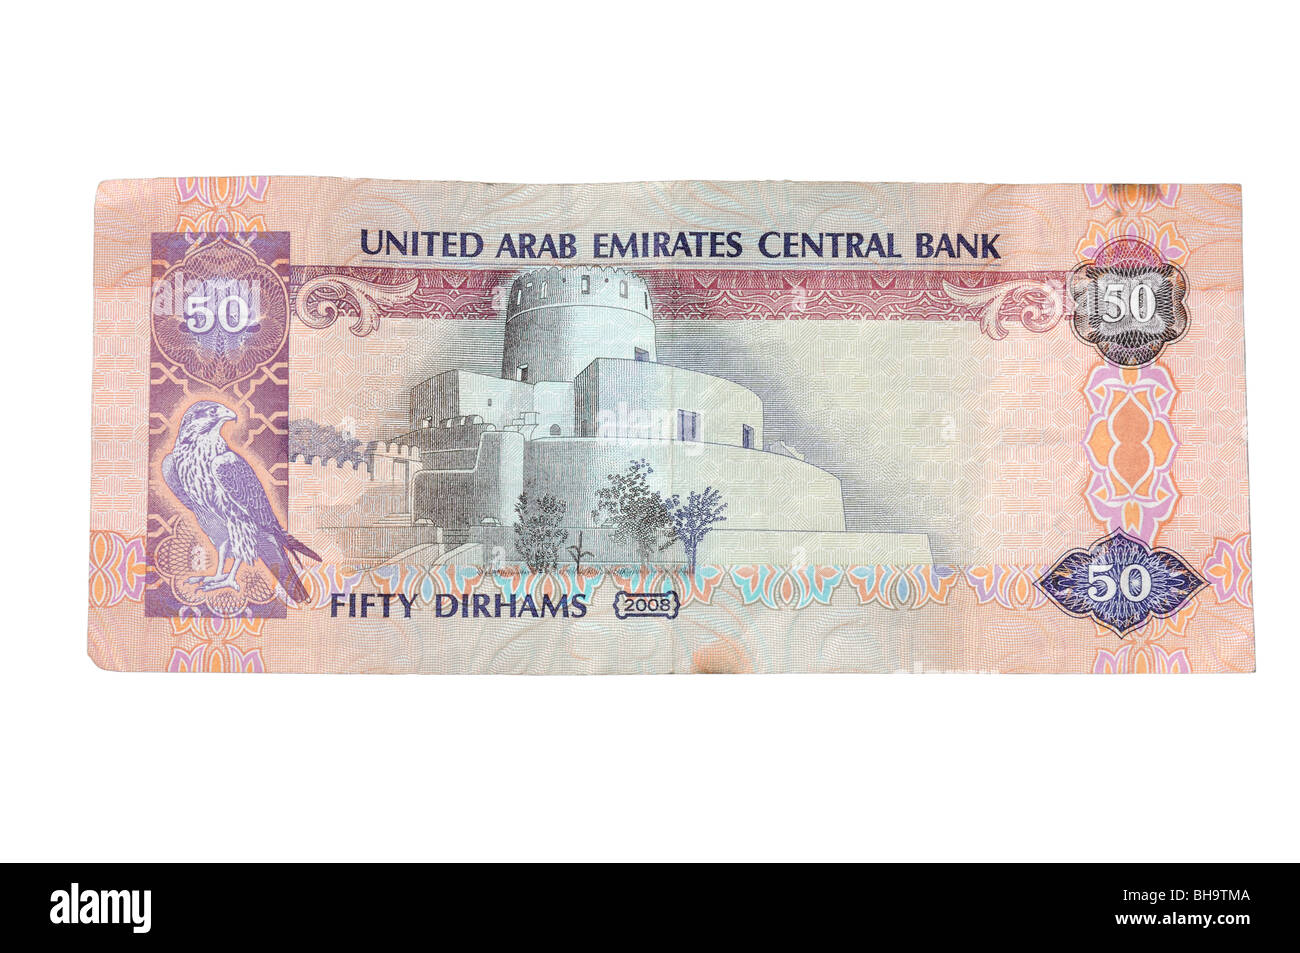 Fifty Dirham - United Arab Emirates Currency Stock Photo